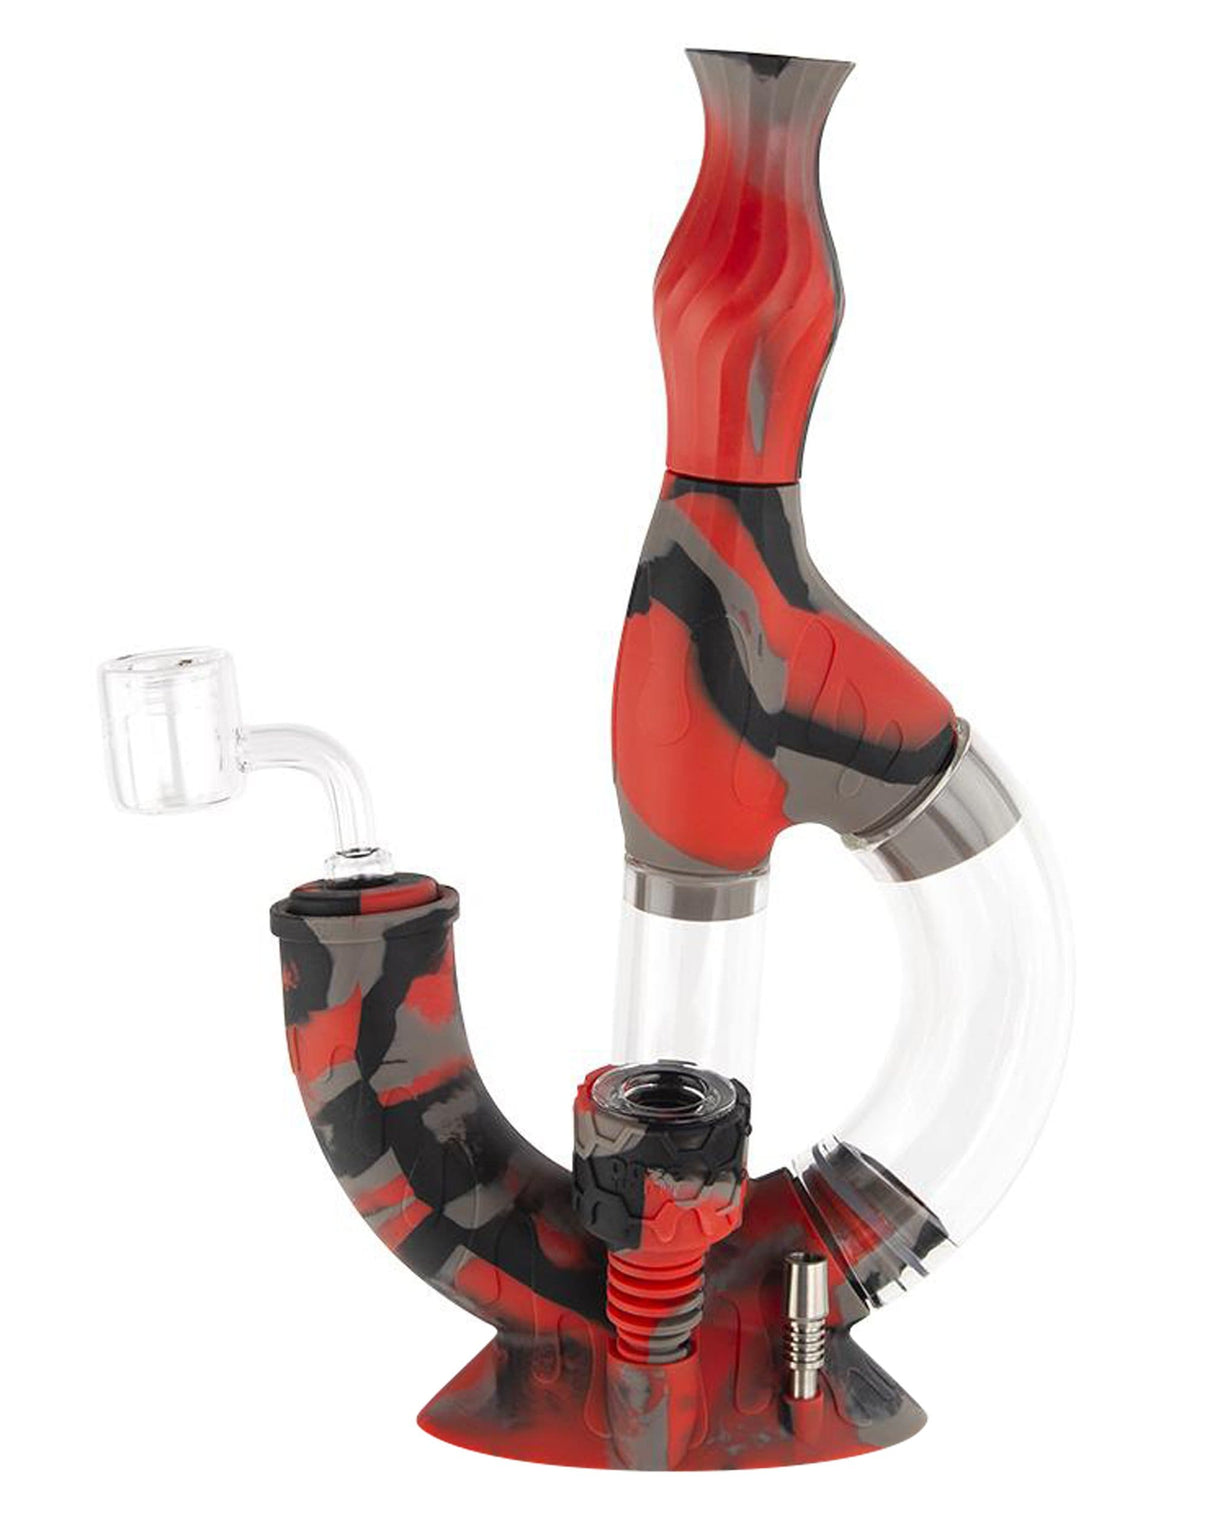 Ooze Echo 4-in-1 Silicone Bong in Red & Black, 9" with Slitted Percolator, Front View